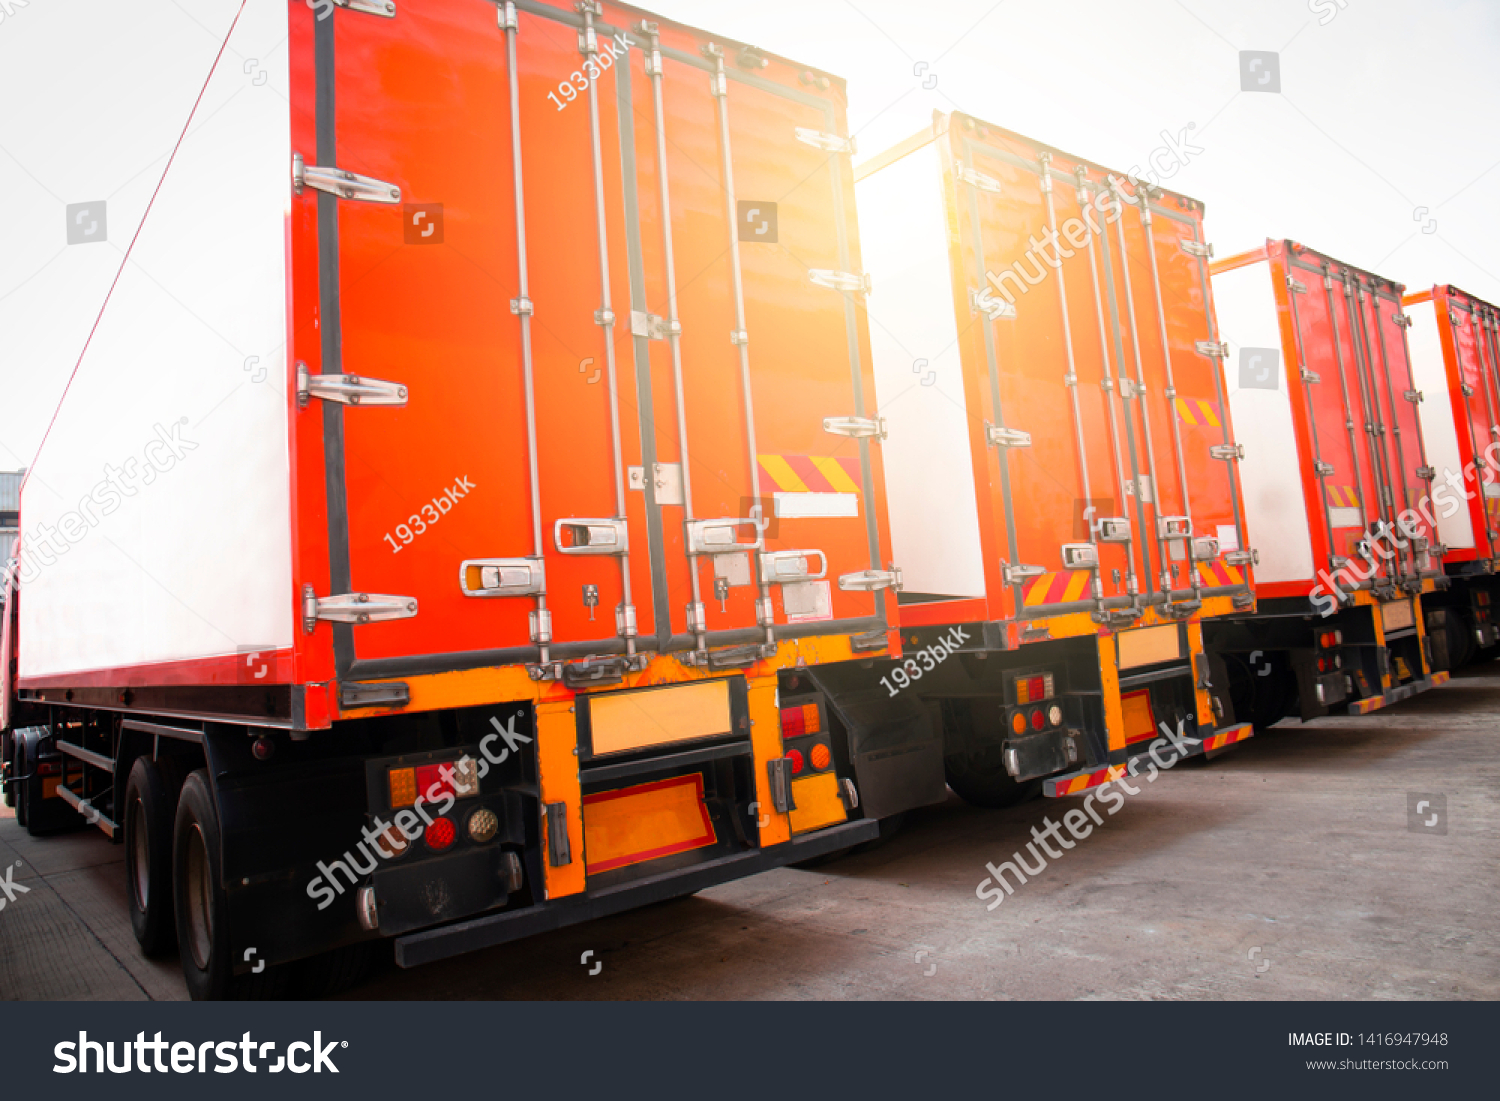 truck container, semi truck trailer modern parking at warehouse, freight industry logistics transport. #1416947948